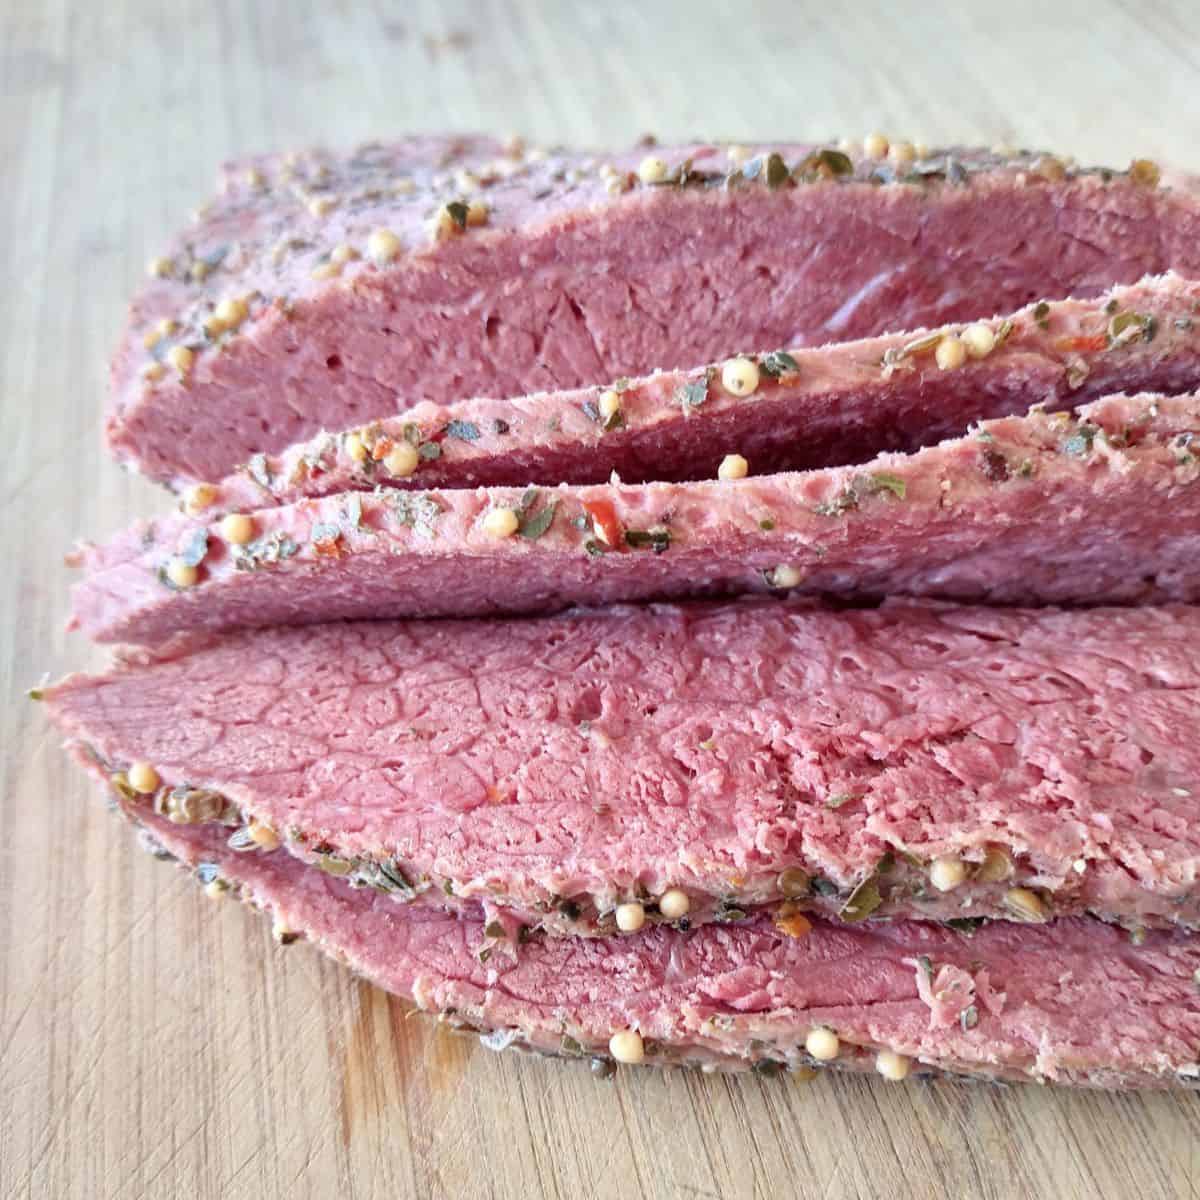 Sliced corned beef with spices on the outside laying on a wood cutting board.